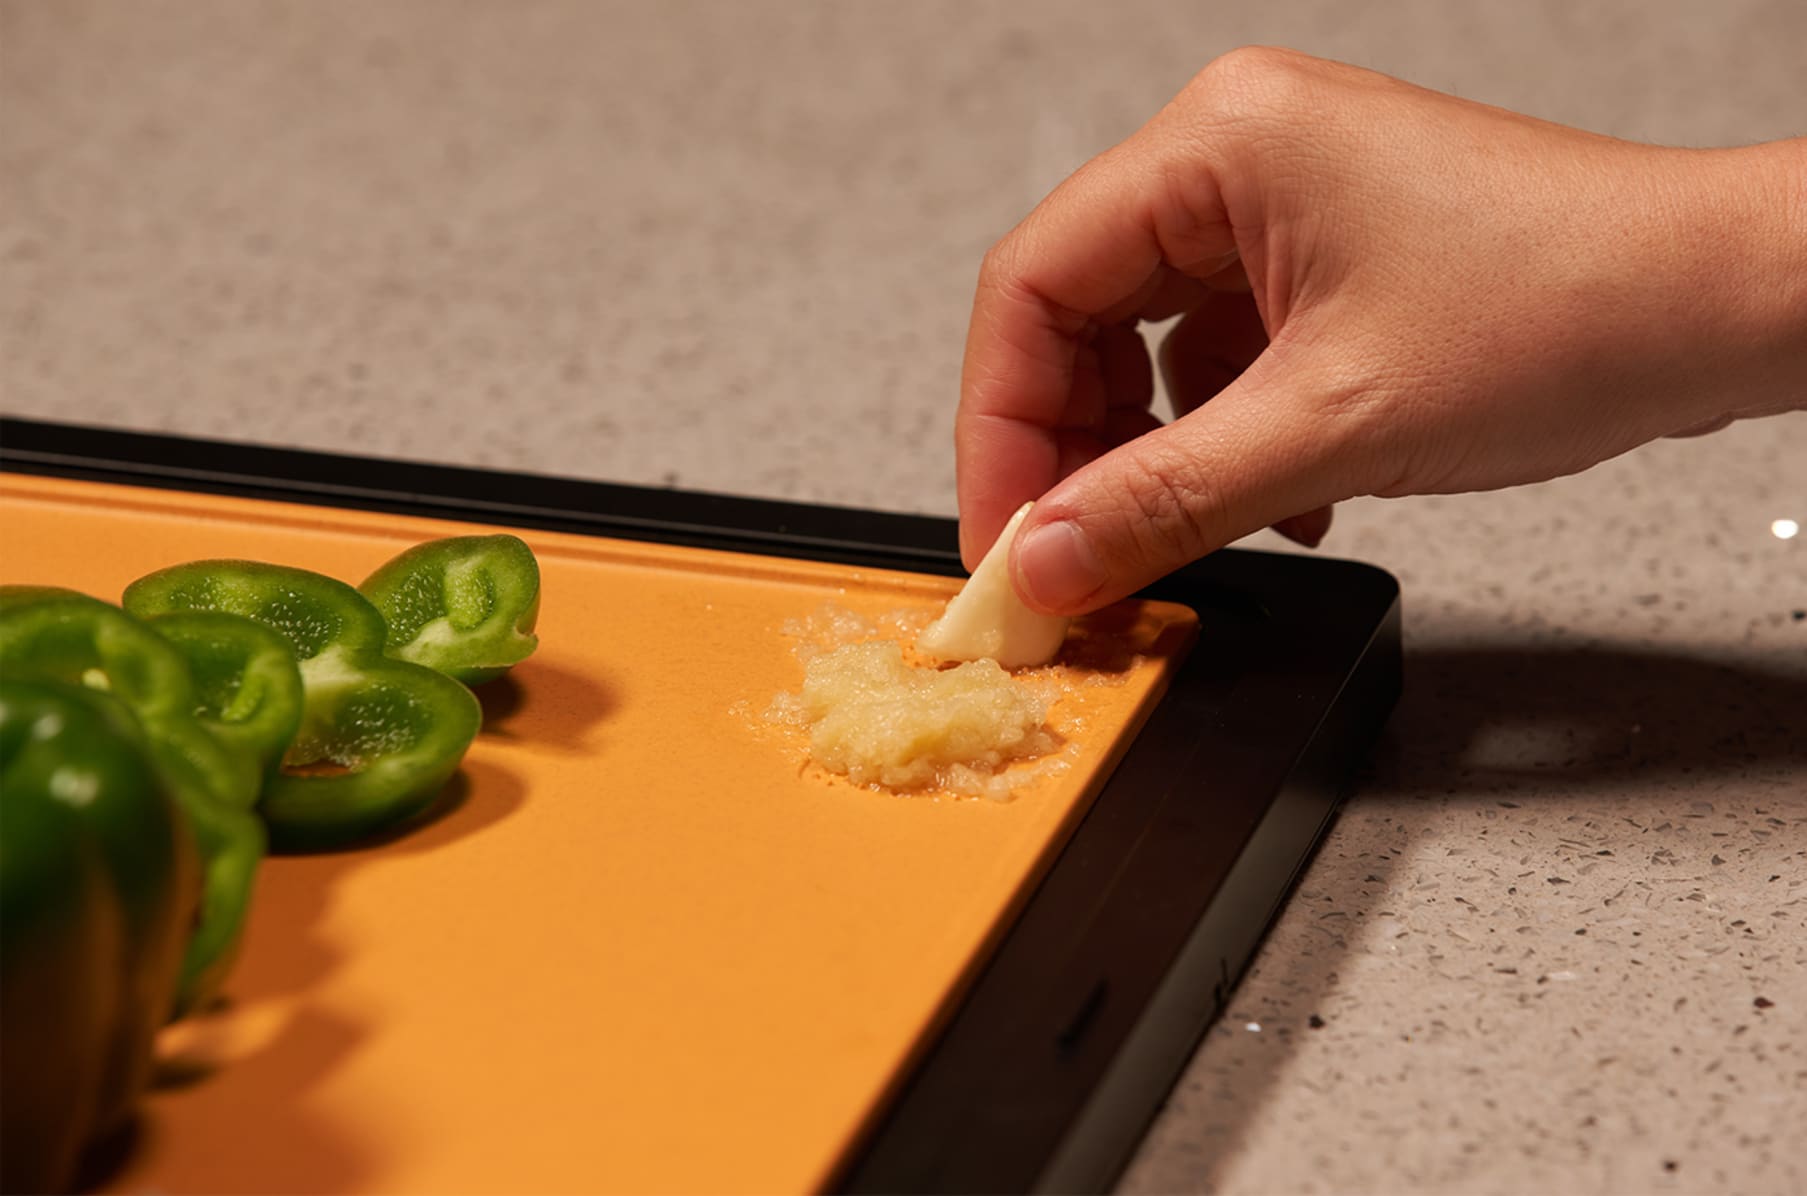 This Incredible Smart Cutting Board Has a Built-In Scale, Timer